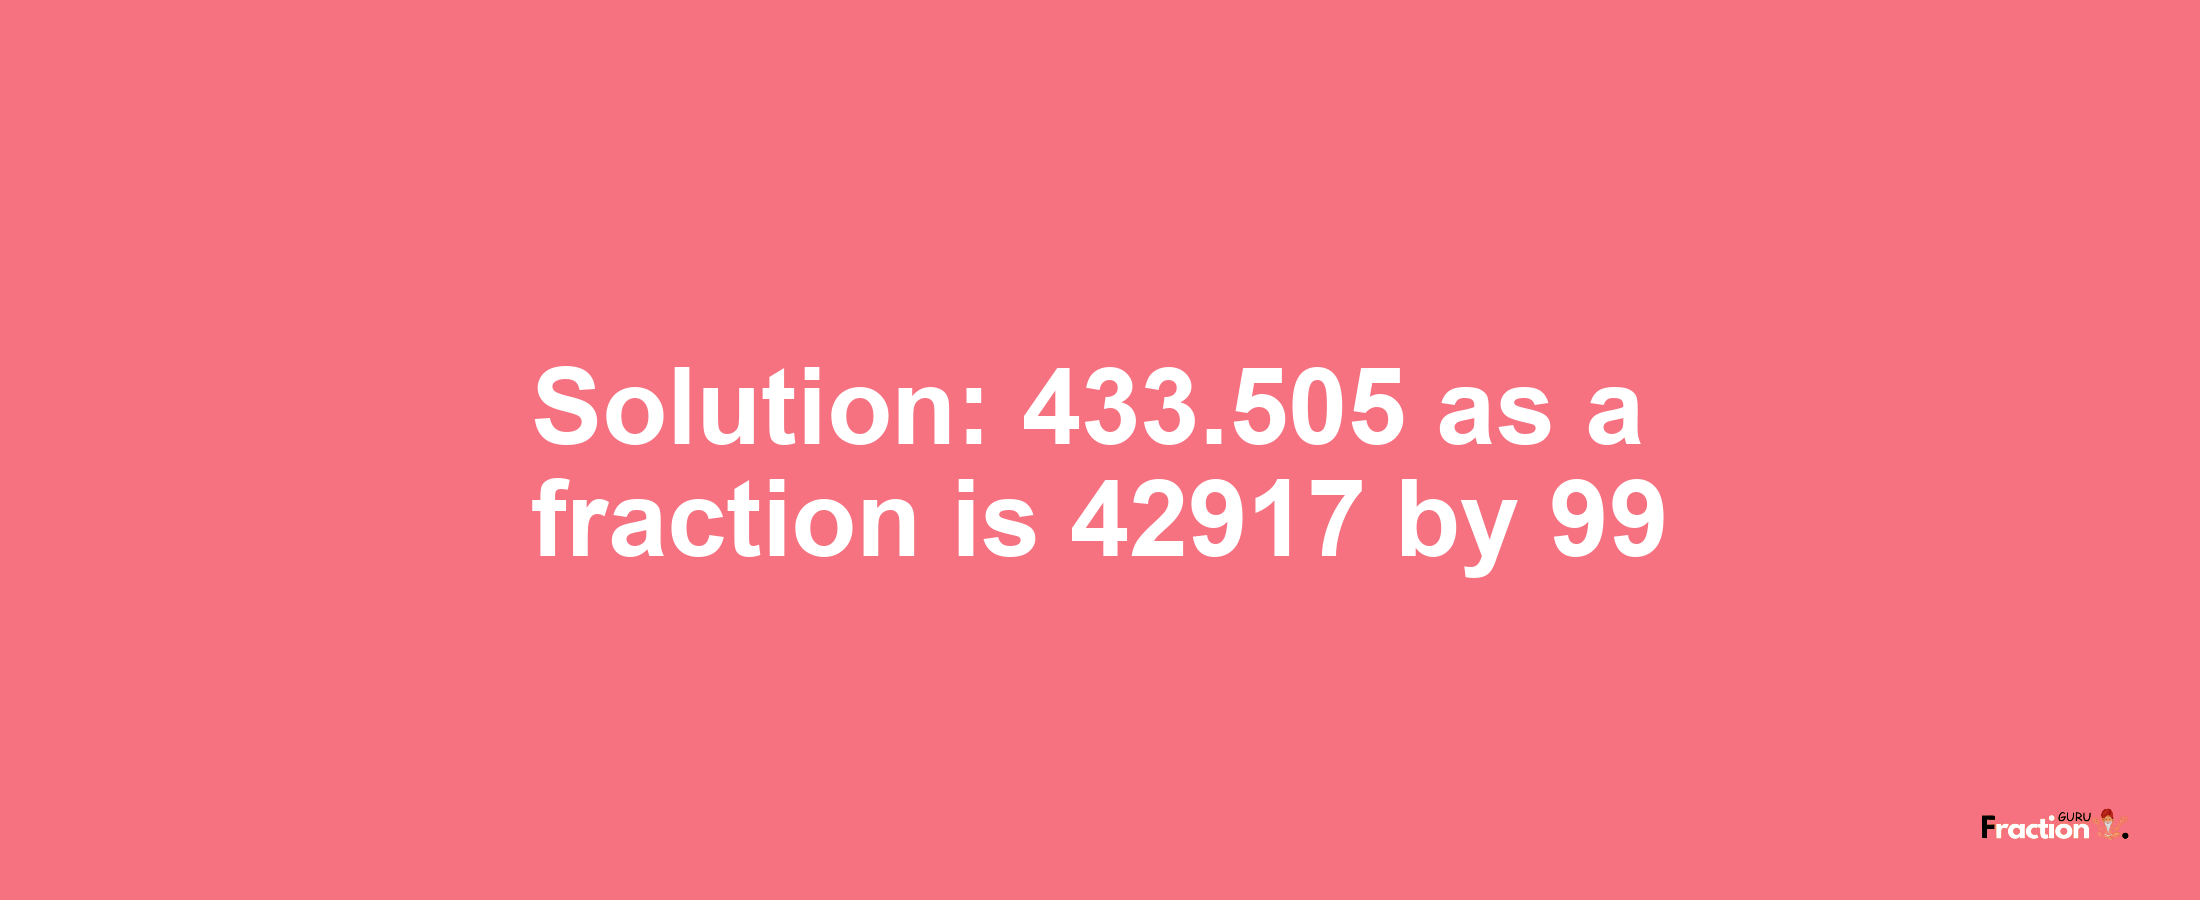 Solution:433.505 as a fraction is 42917/99